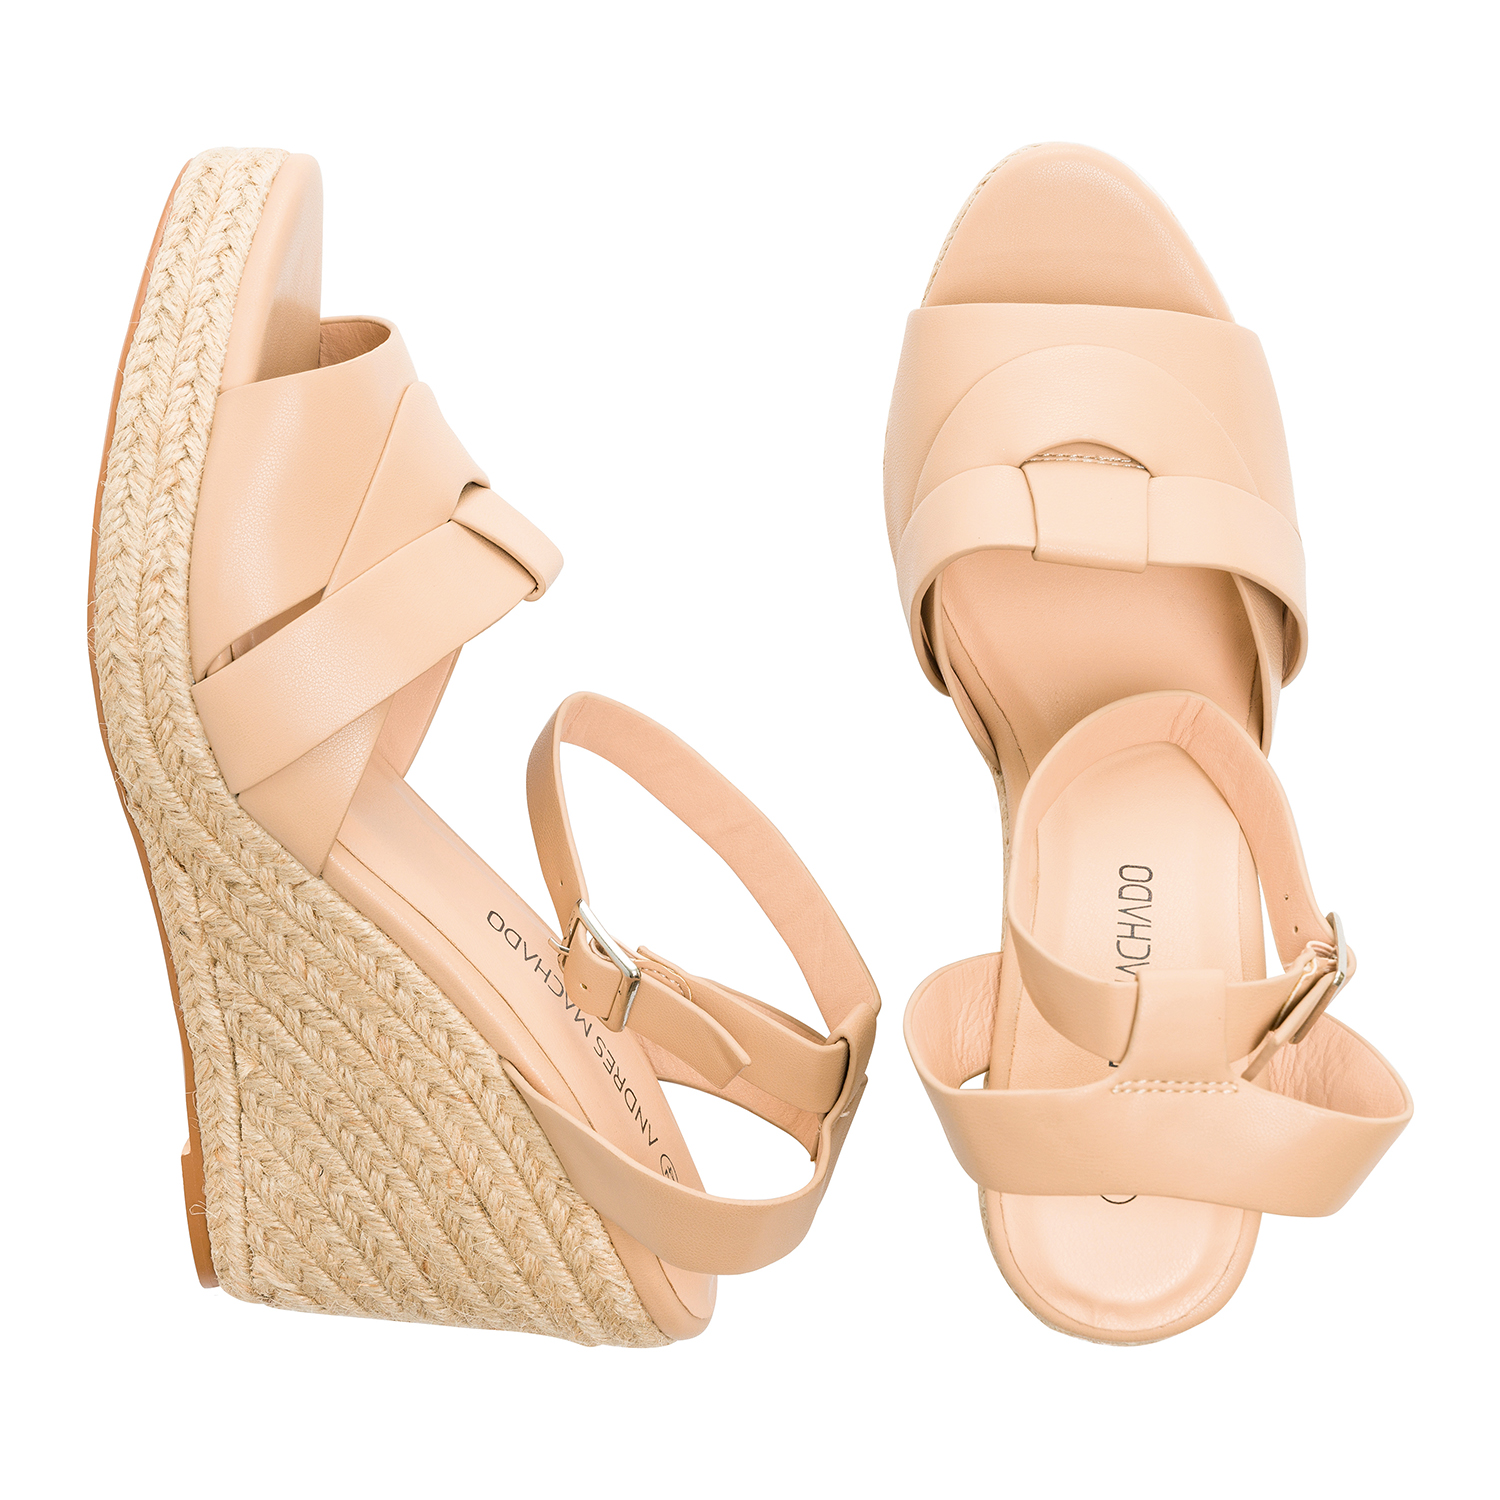 Beige faux leather espadrilles with jute wedge 